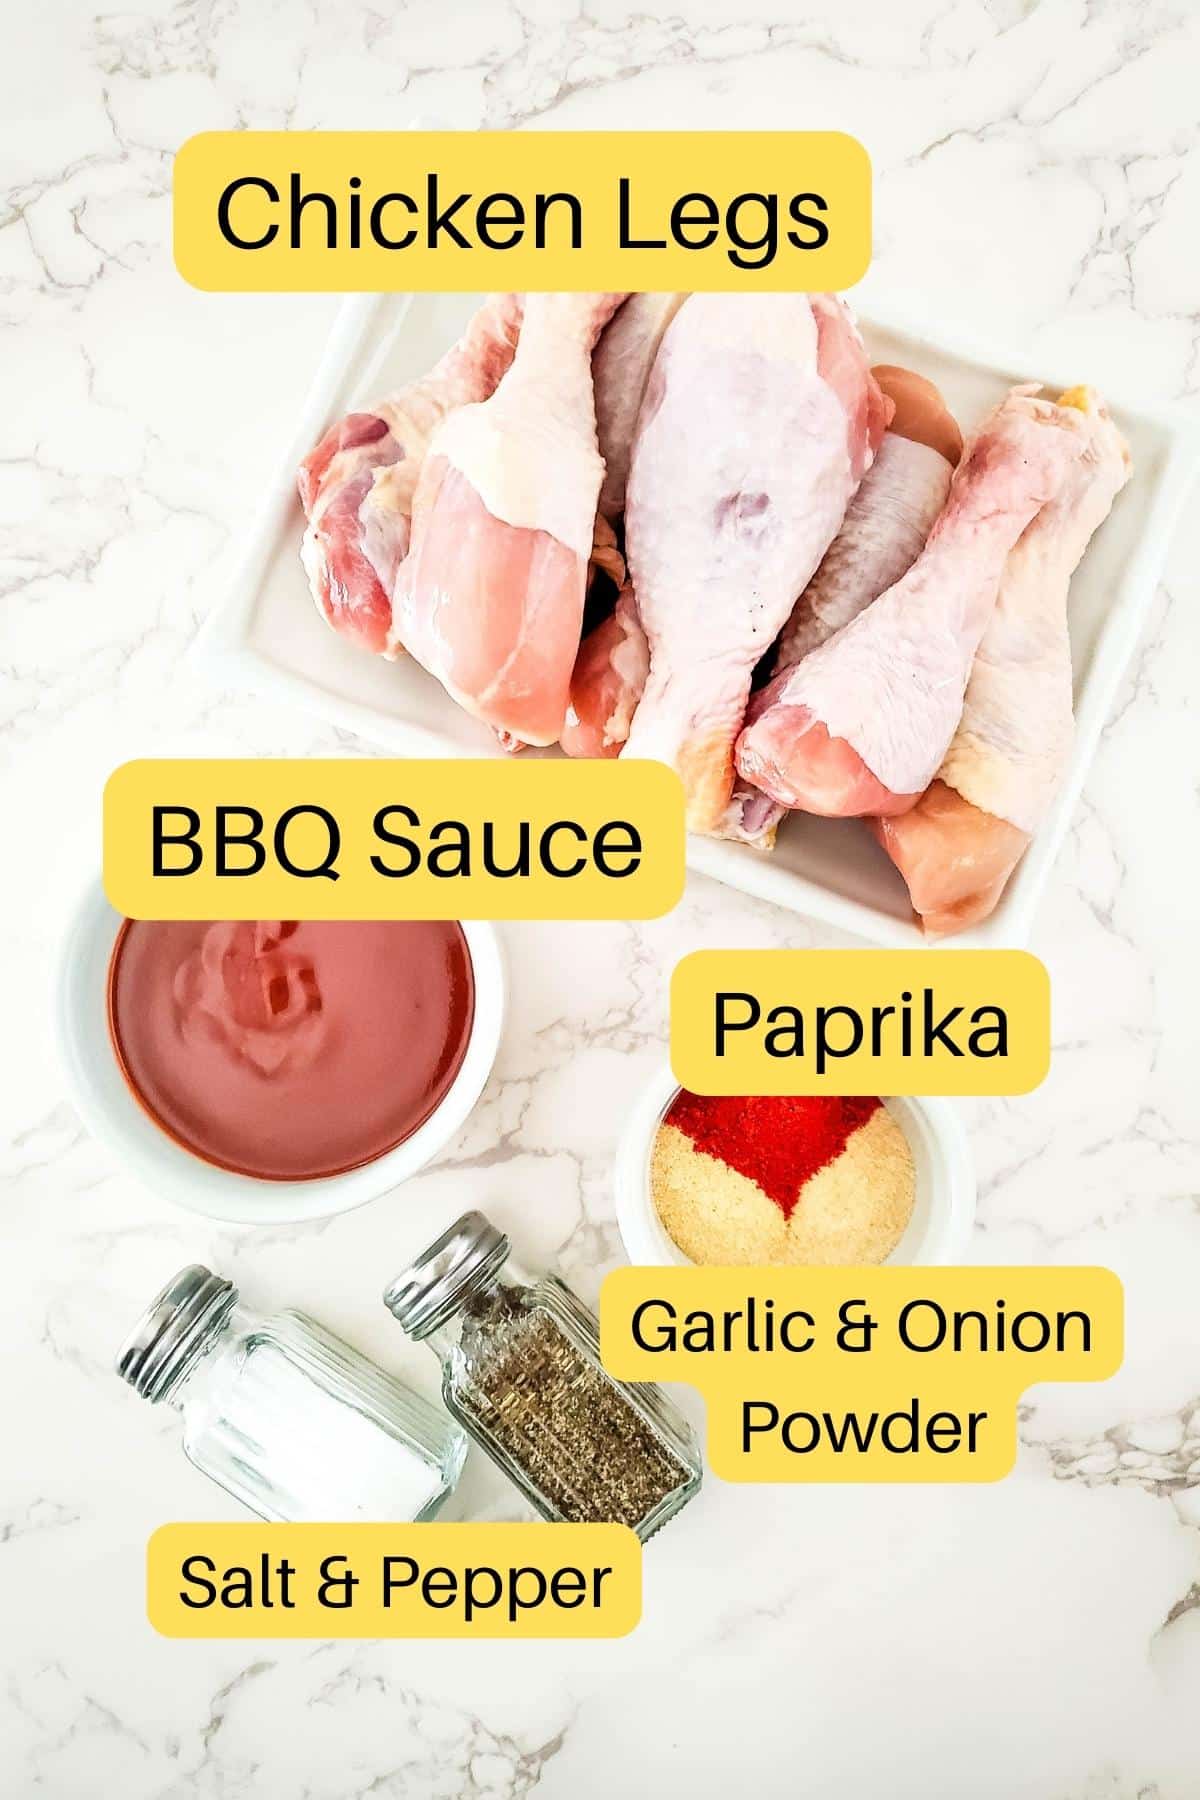 BBQ chicken leg ingredients showing a plate of chicken wings, a bowl of bbq sauce, paprika, garlic powder, onion powder, salt and pepper.